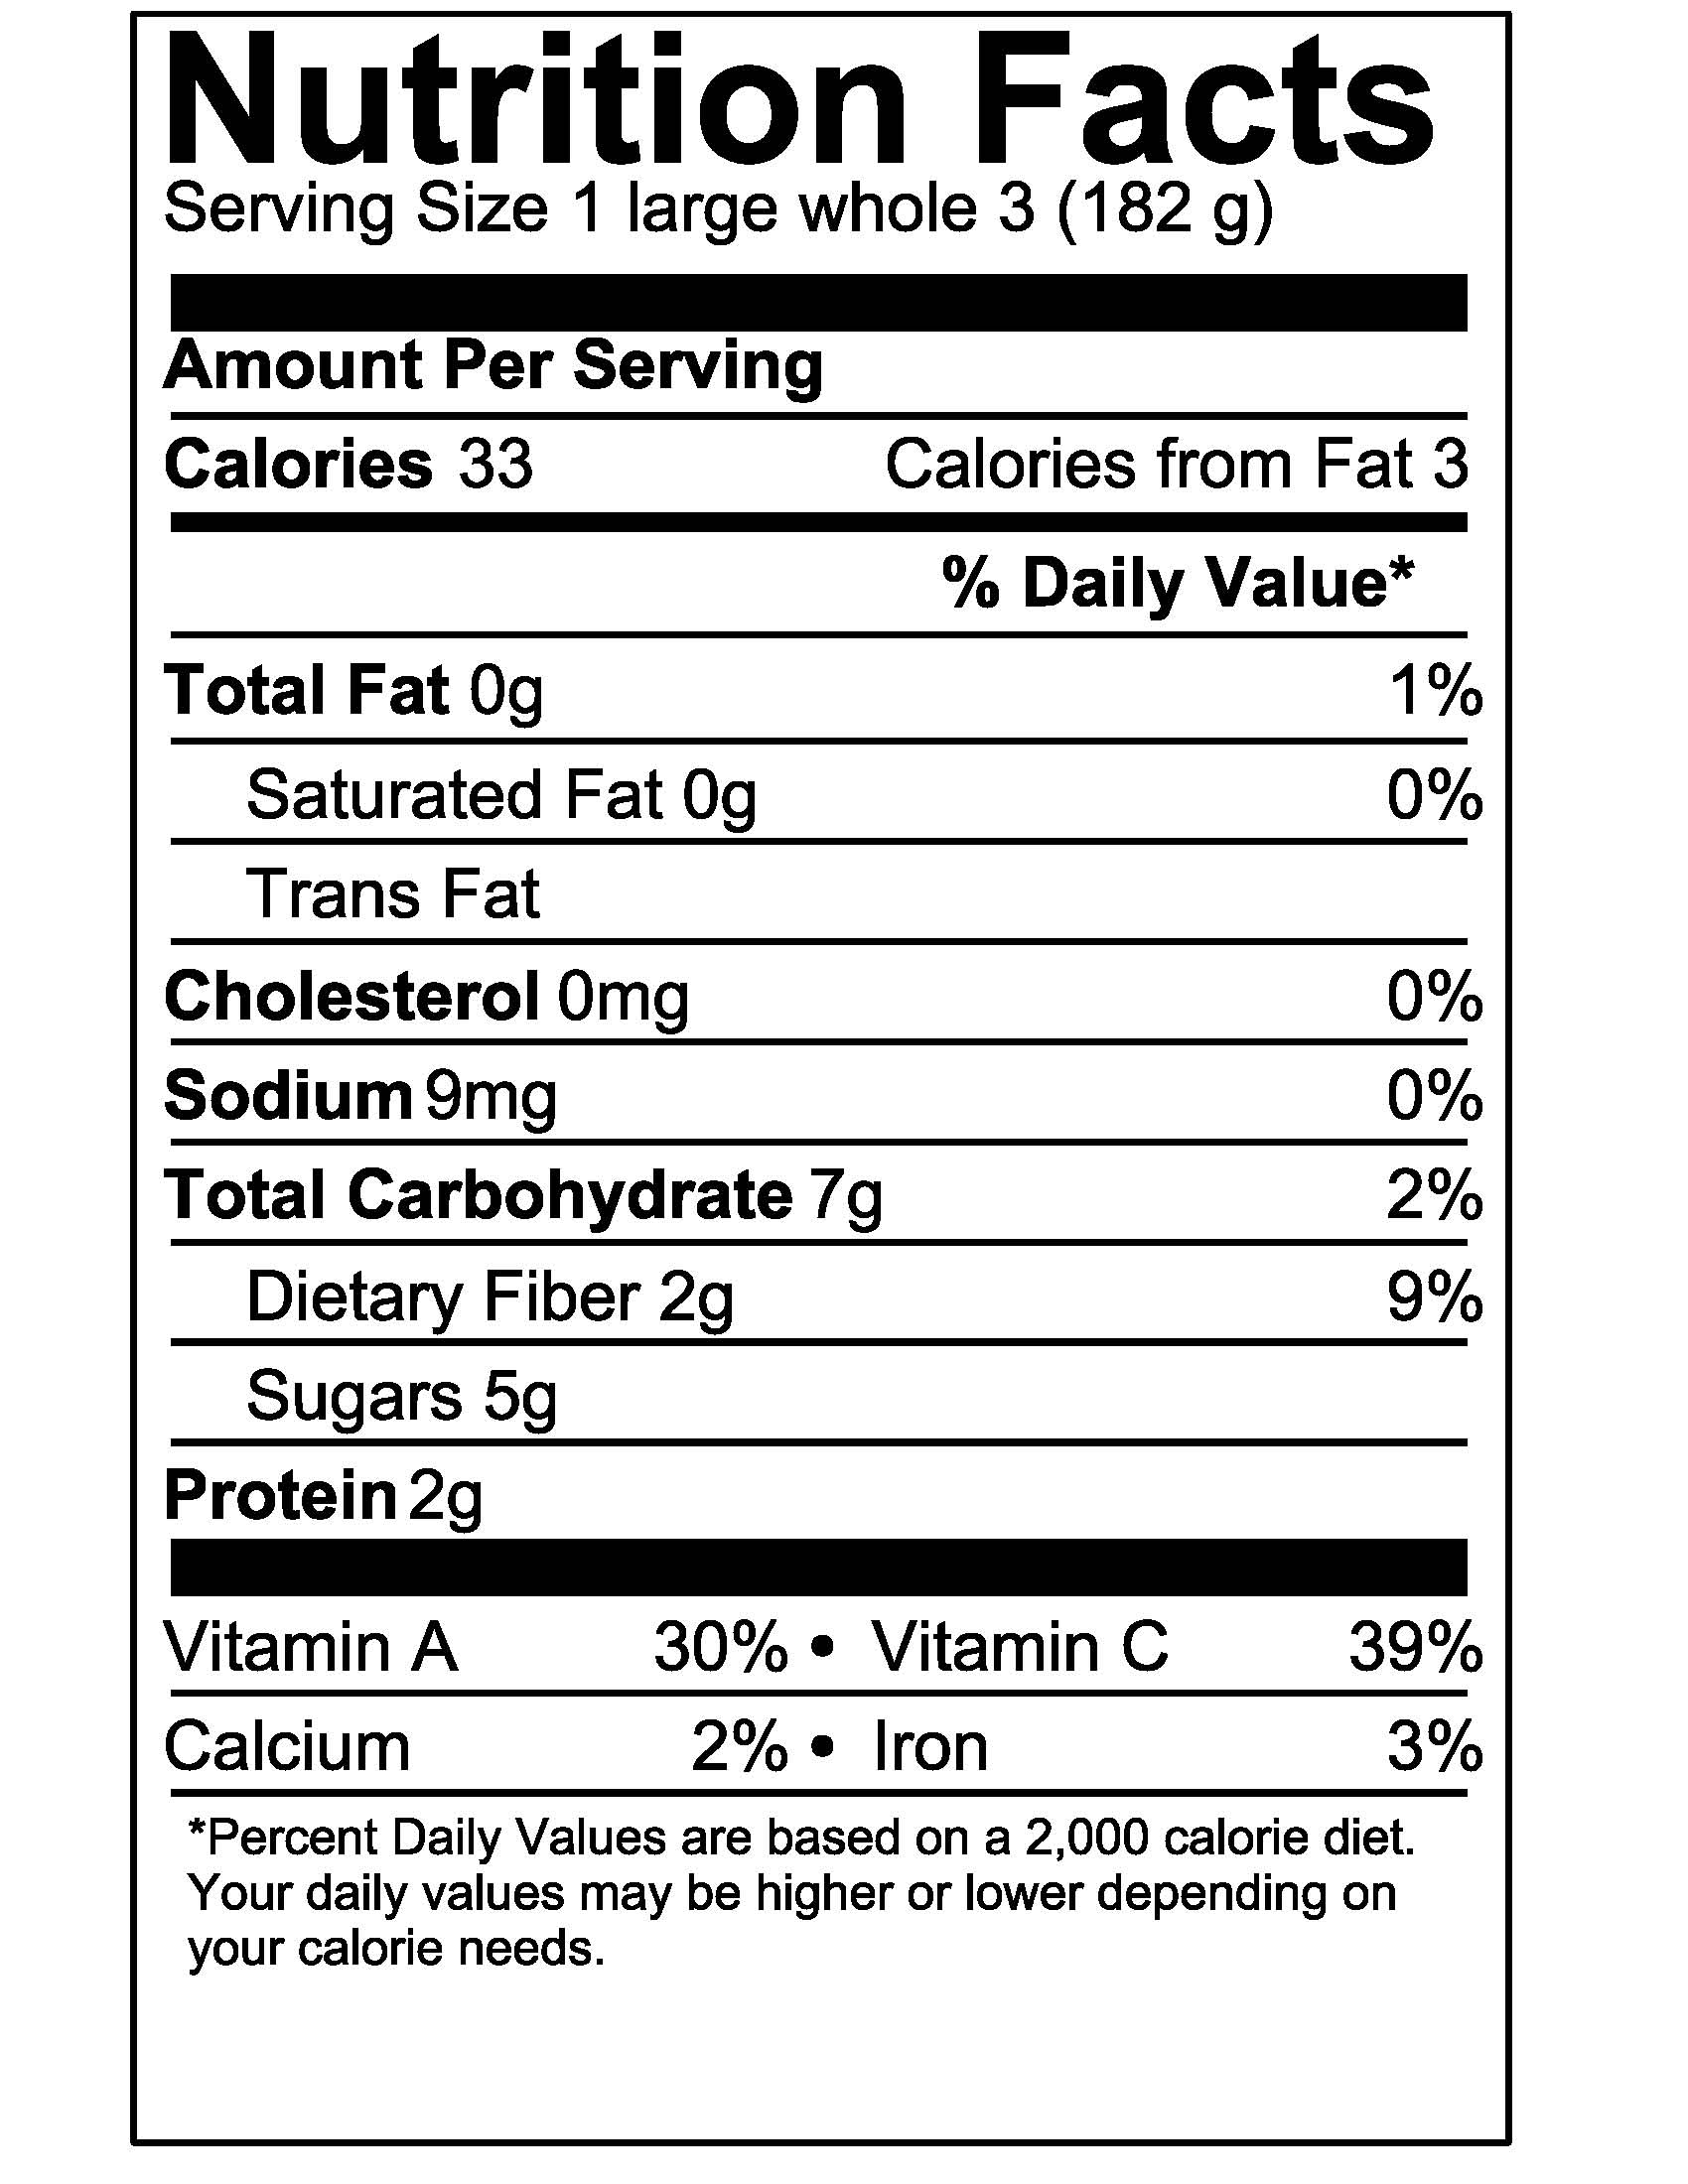 Blank Nutrition Facts Label Template Word Doc Nutrition Facts Blank